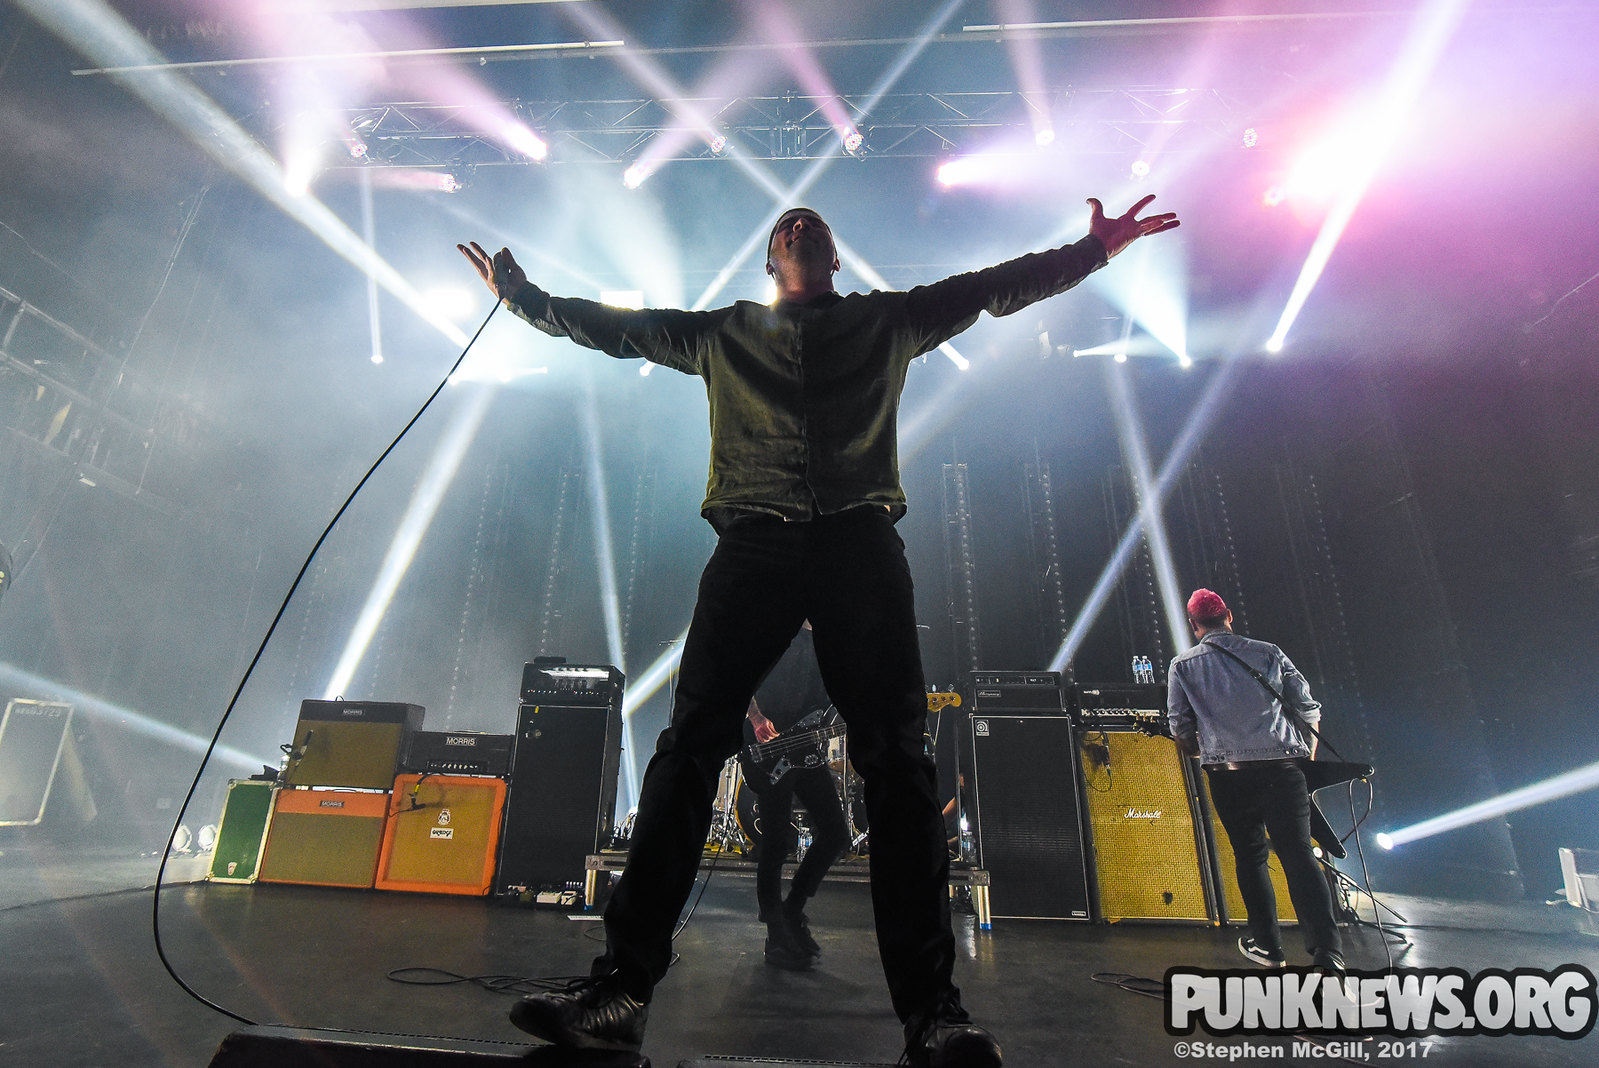 Alexisonfire at The Danforth Music Hall, 12/11